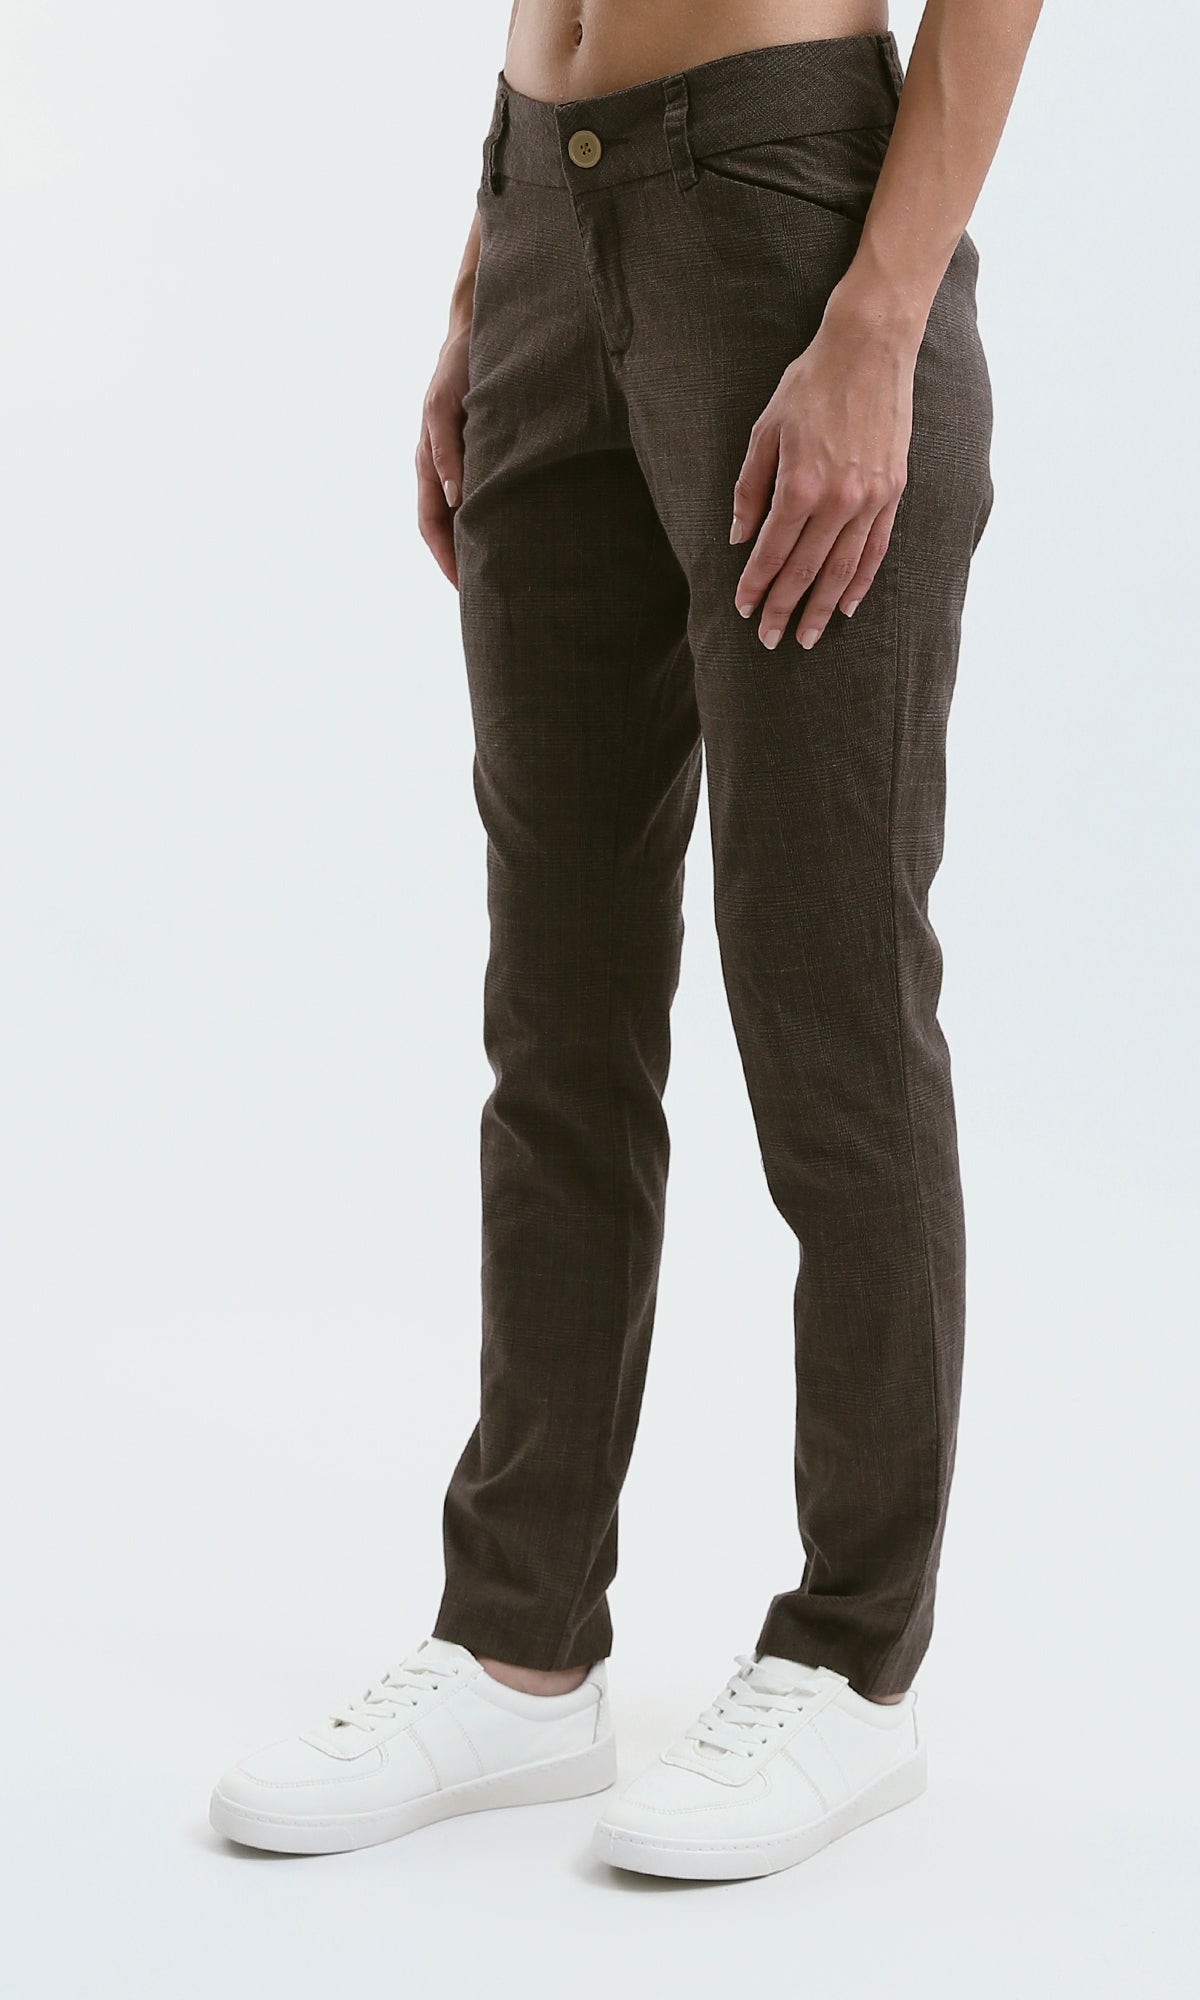 O189394 Patterned Classic Pants With Side Pockets - Brown